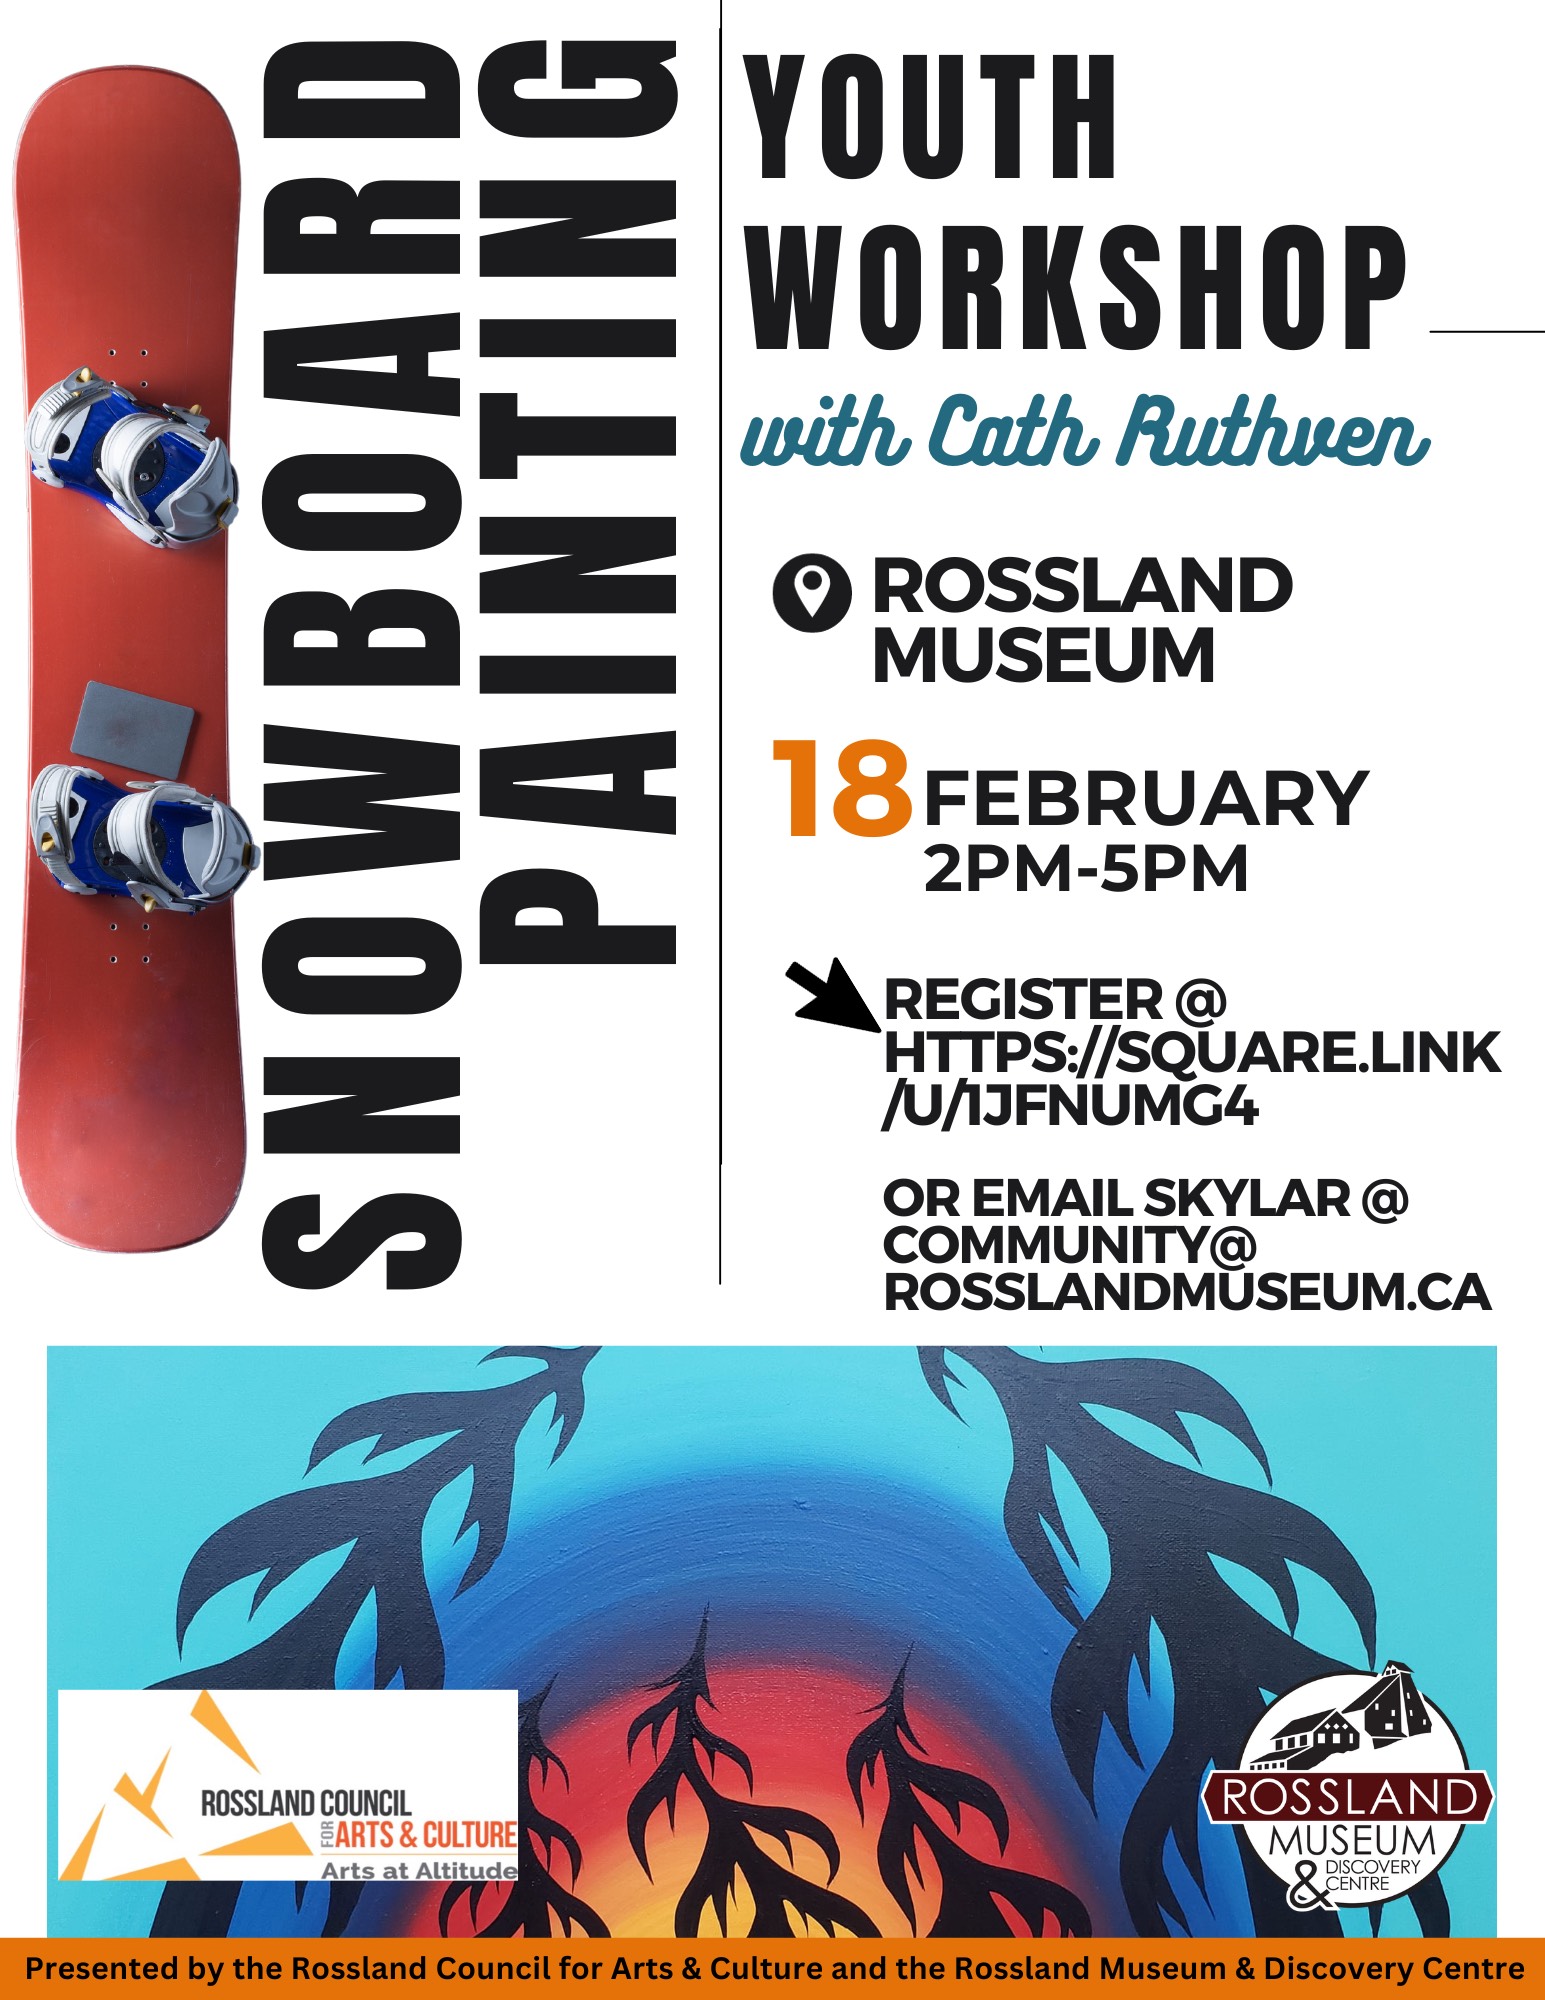 Exciting new events coming up at Rossland Museum!